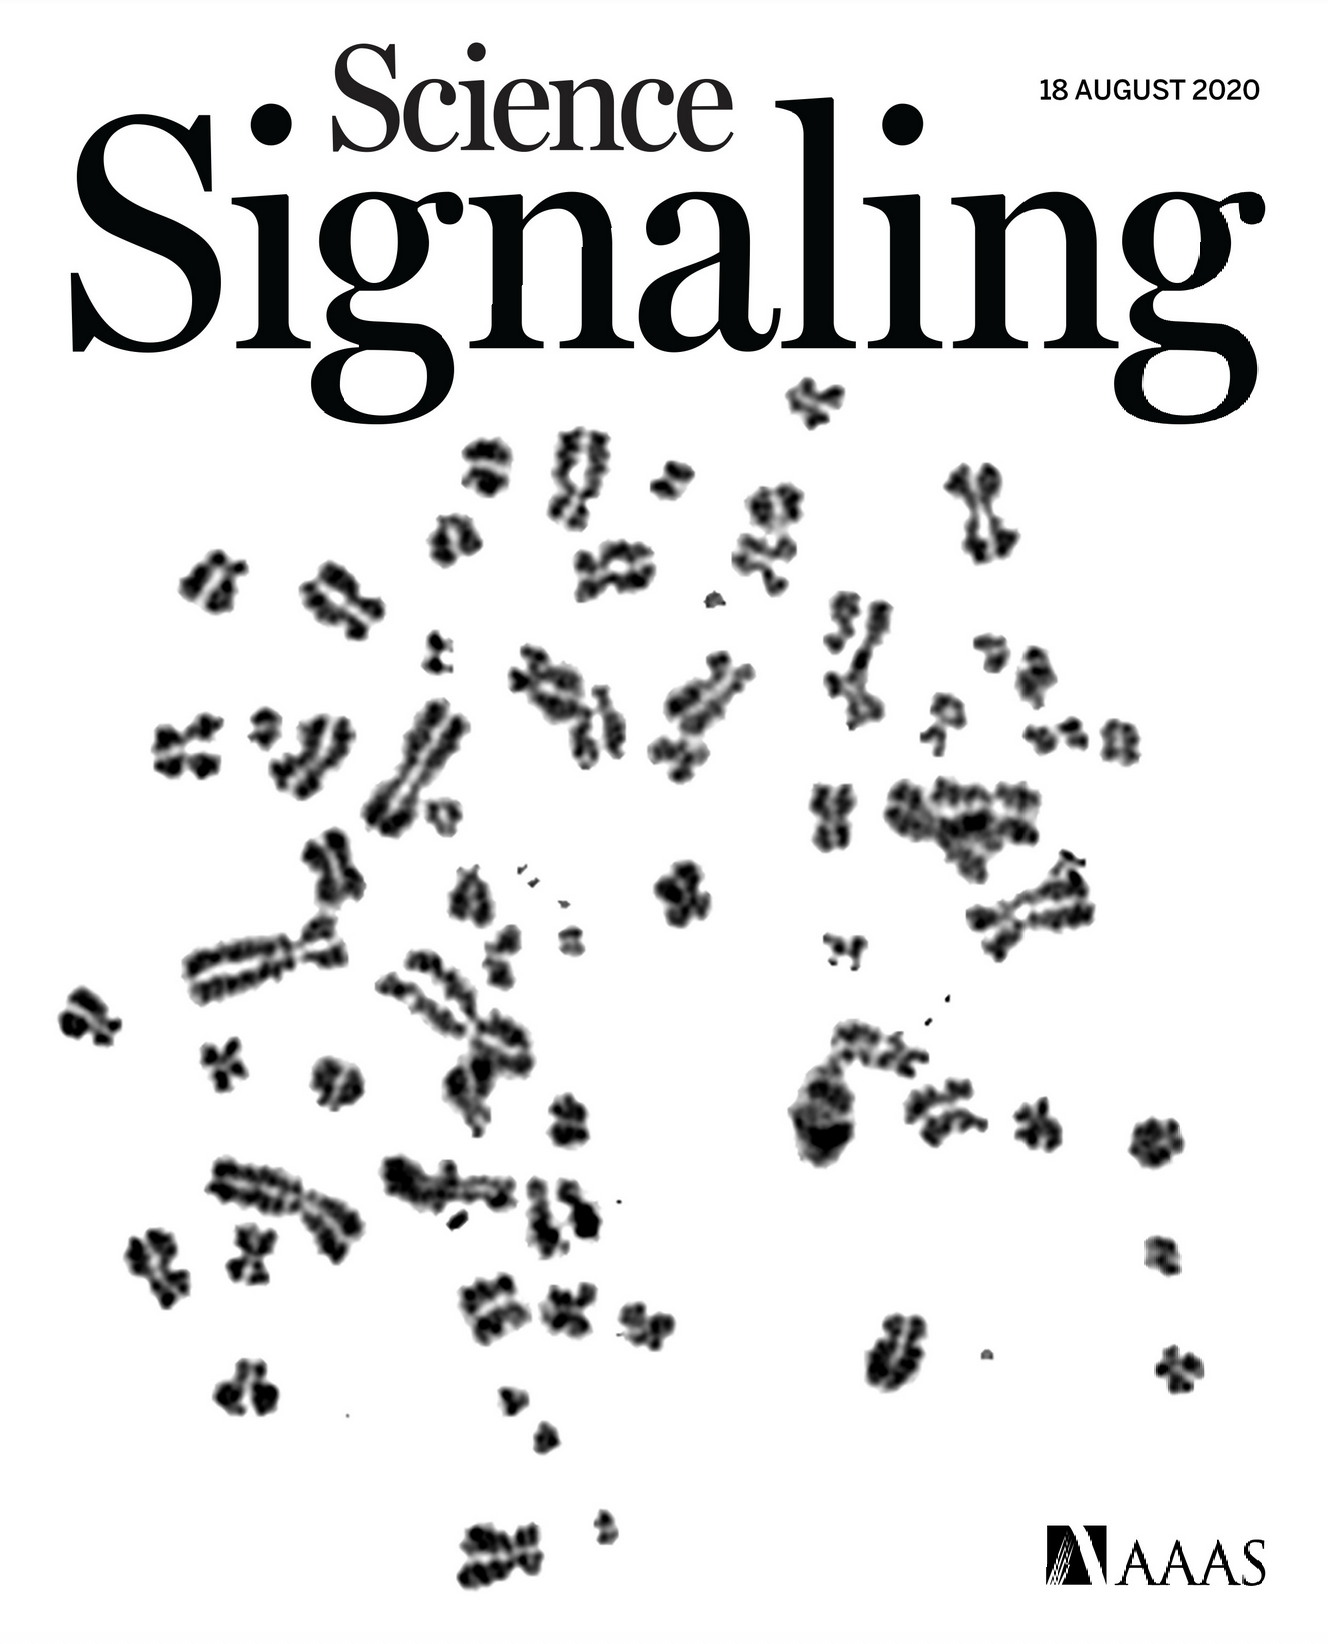 Cover of Science Signaling, August 20, 2020.